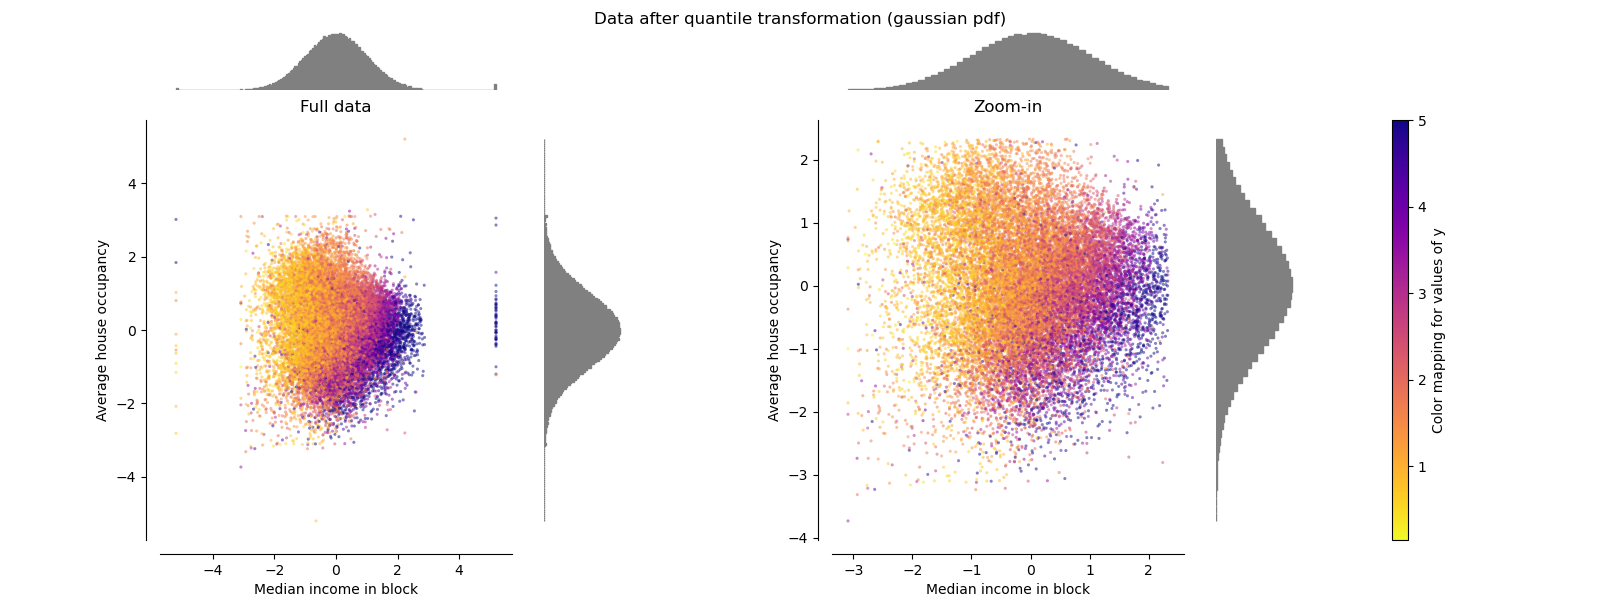 Data after quantile transformation (gaussian pdf), Full data, Zoom-in